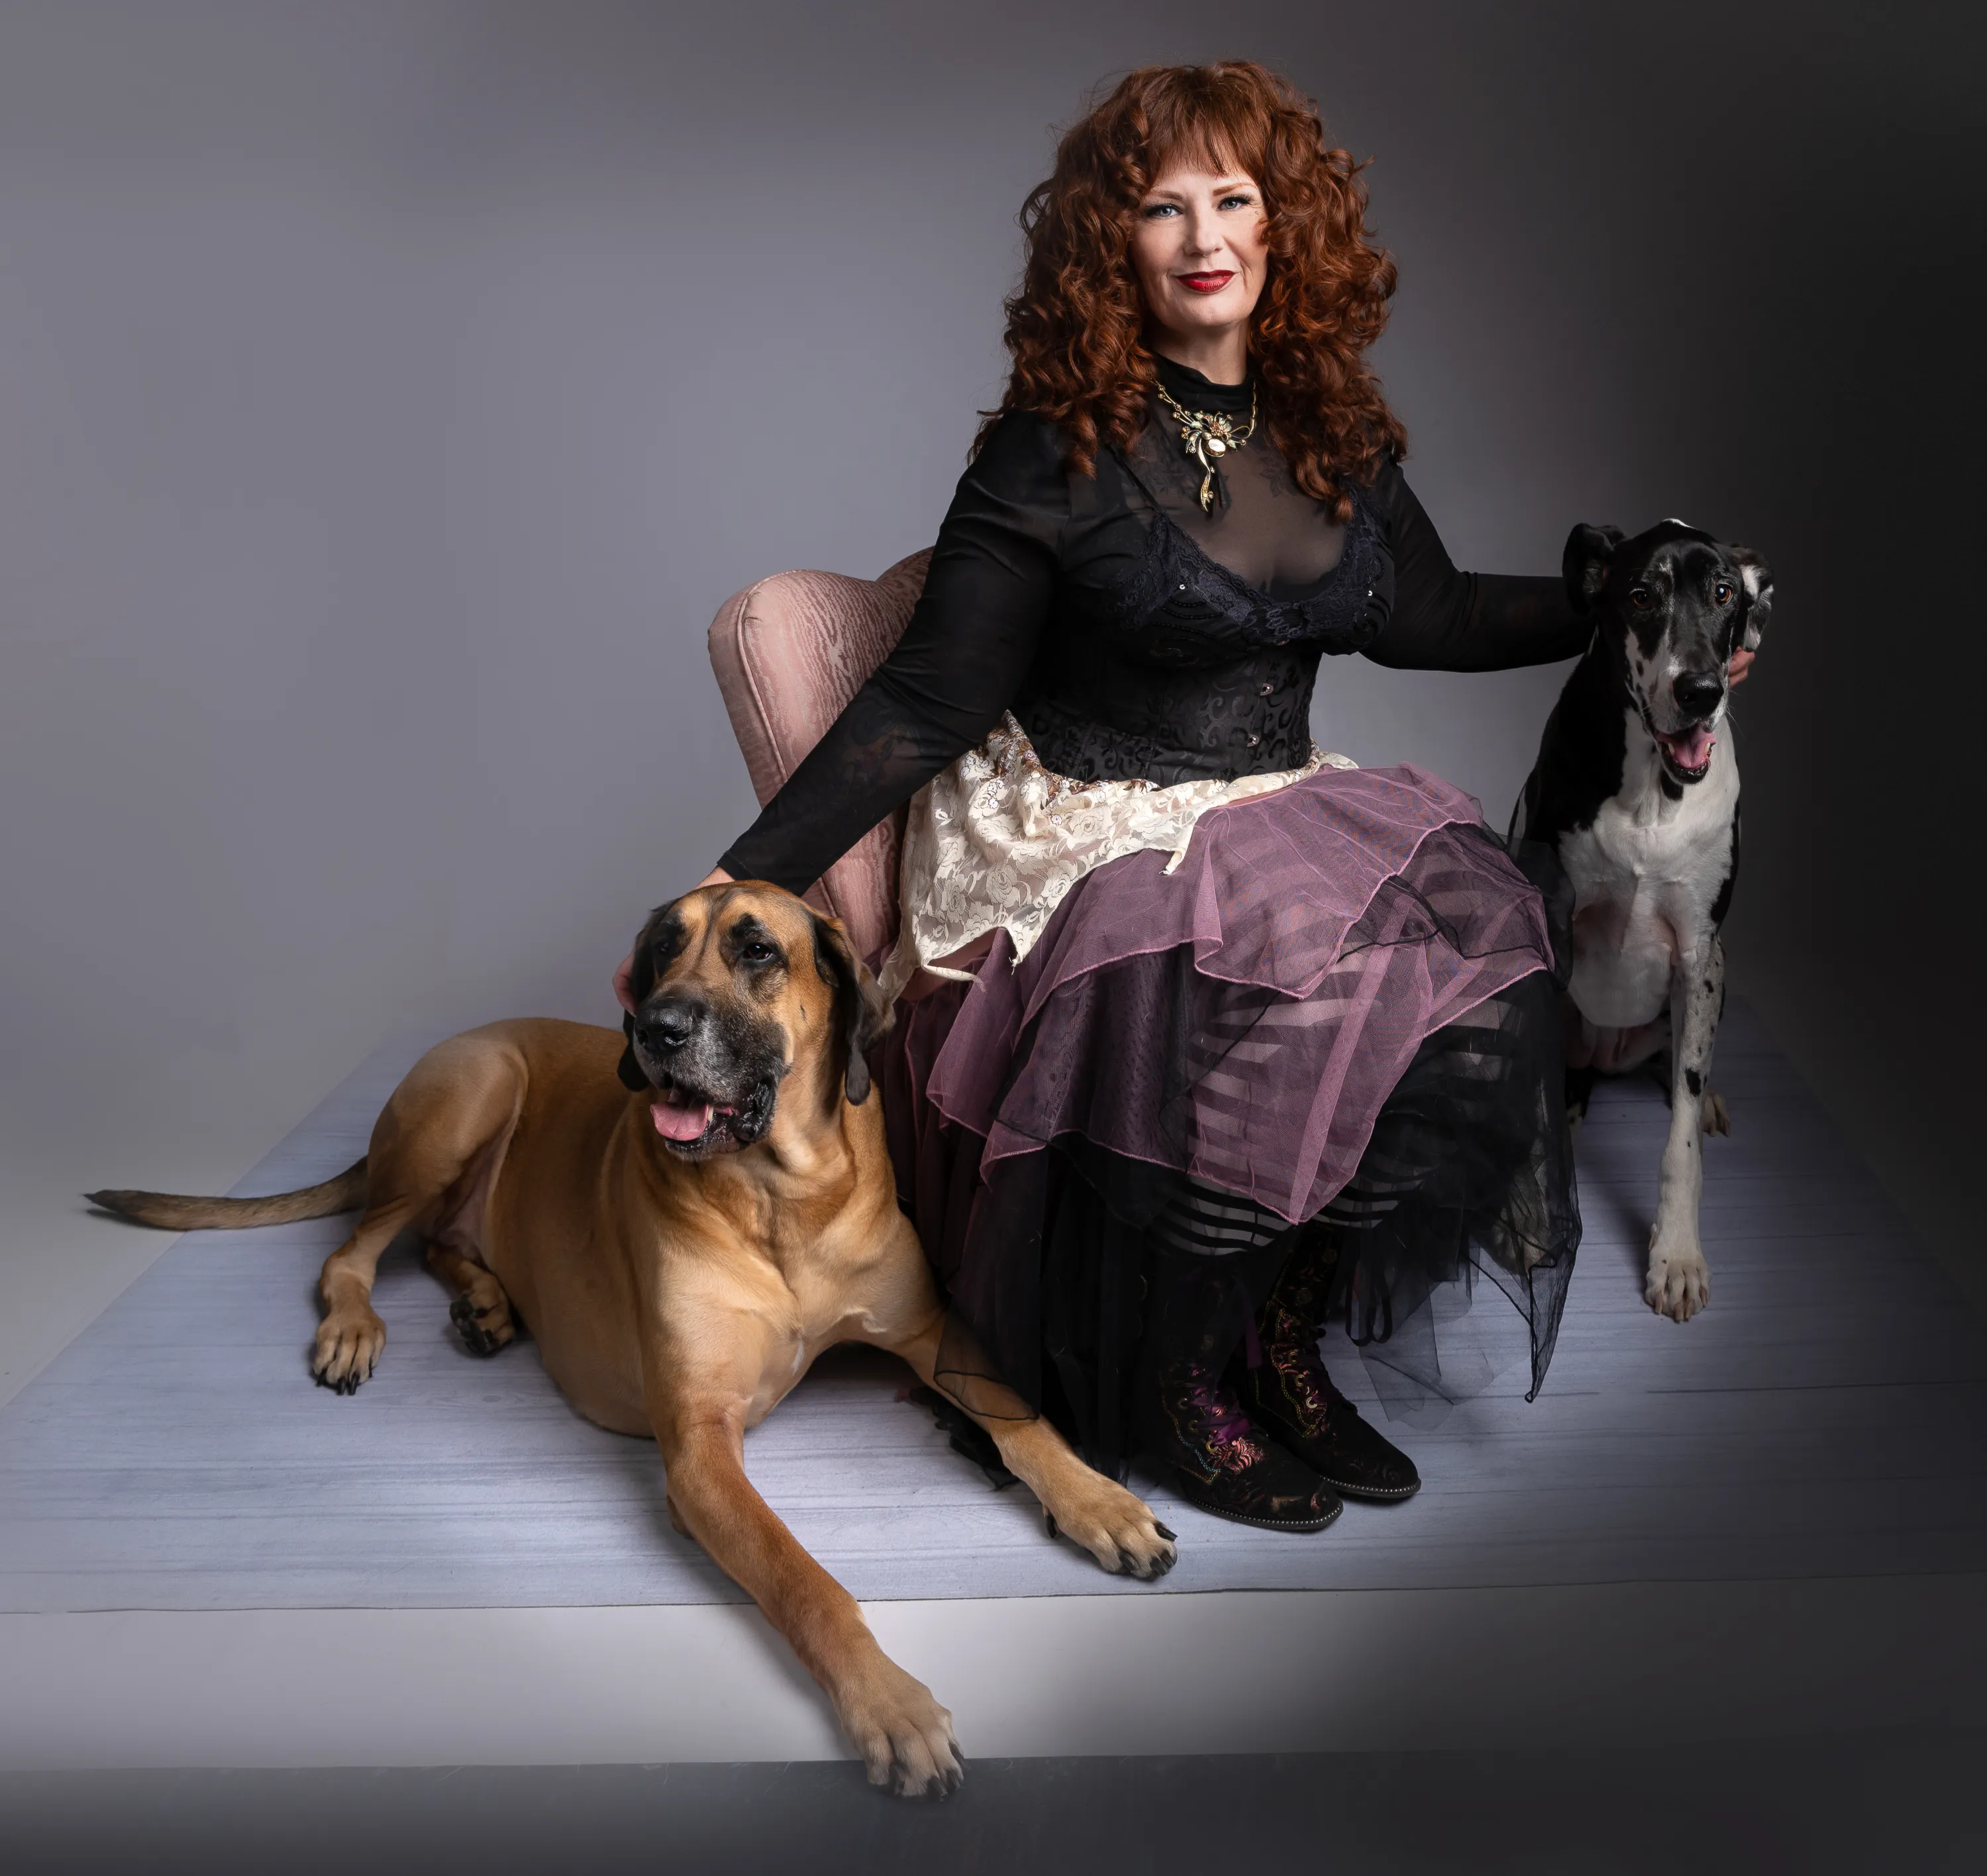 Redhaired woman with two Great Danes